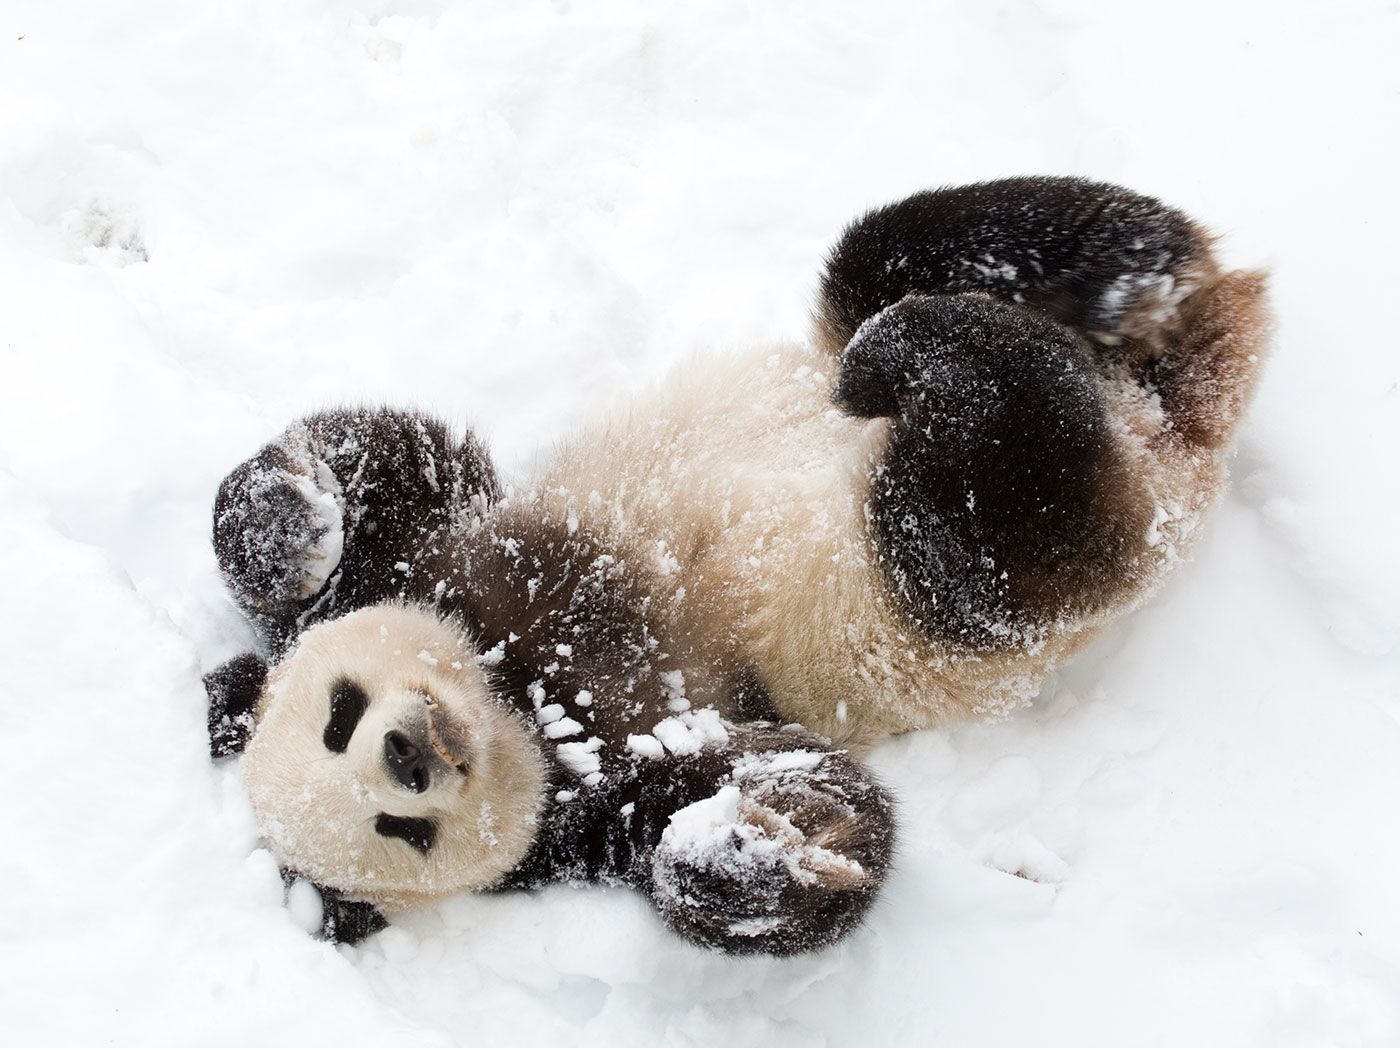 Why the National Zoo Is Saying Goodbye to Its Giant Pandas